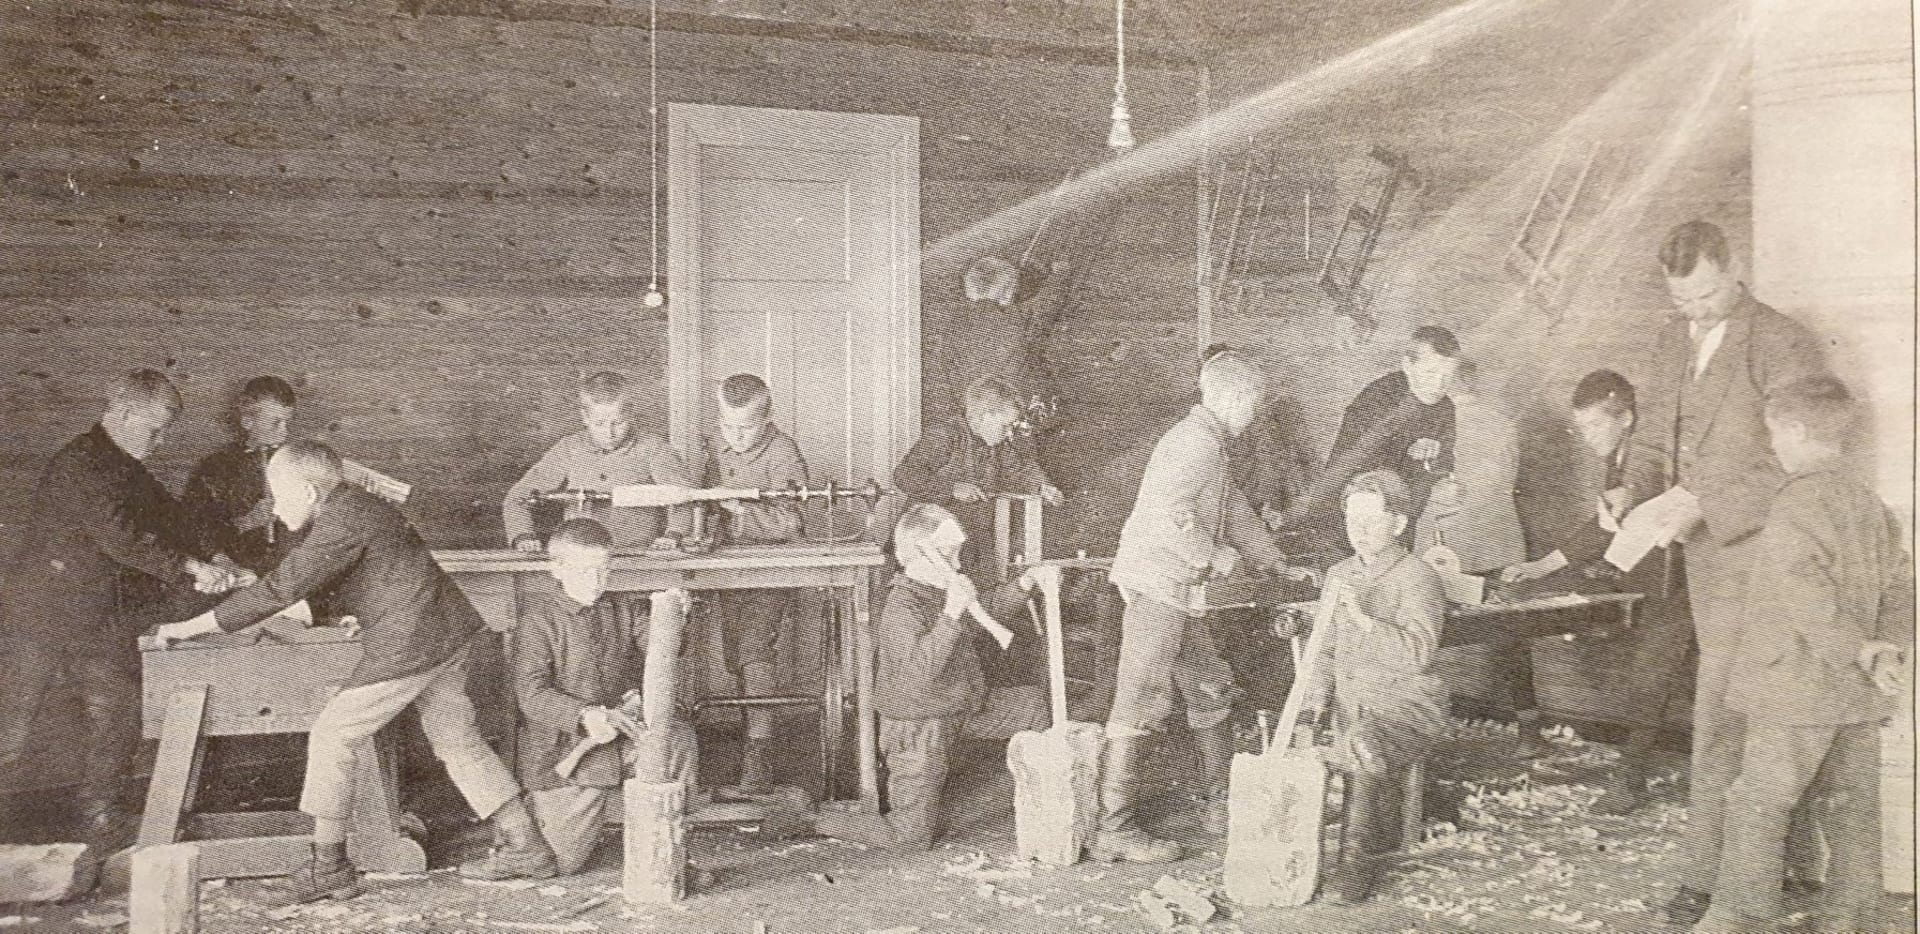 The boys' woodworking class upstairs in the 1930s